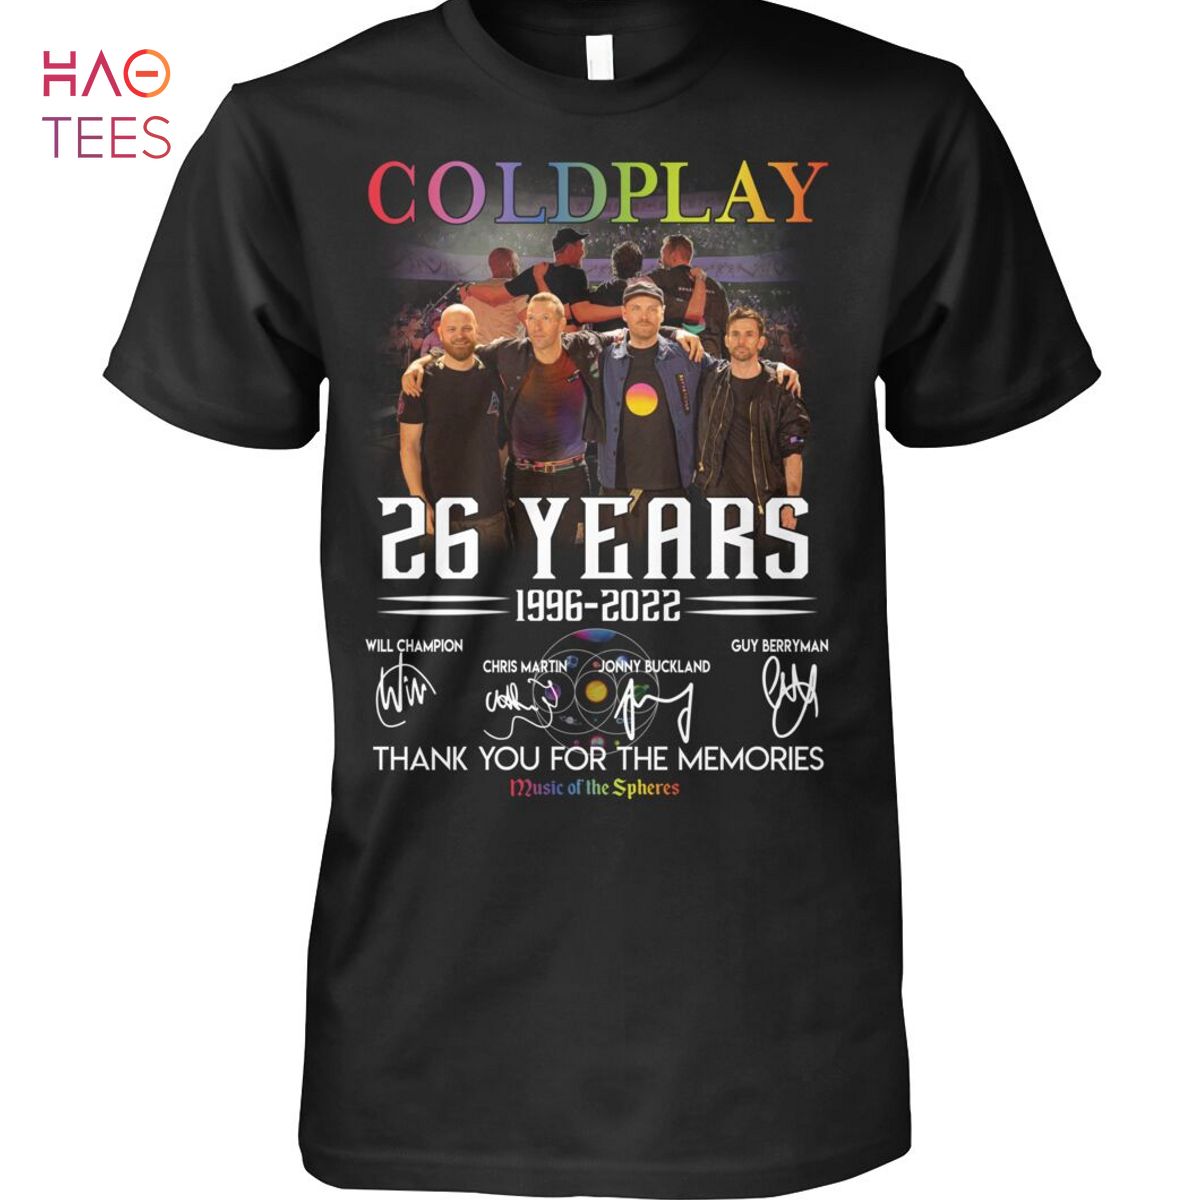 Coldplay 26 Years 1996-2022 Thank you For The Memories Shirt